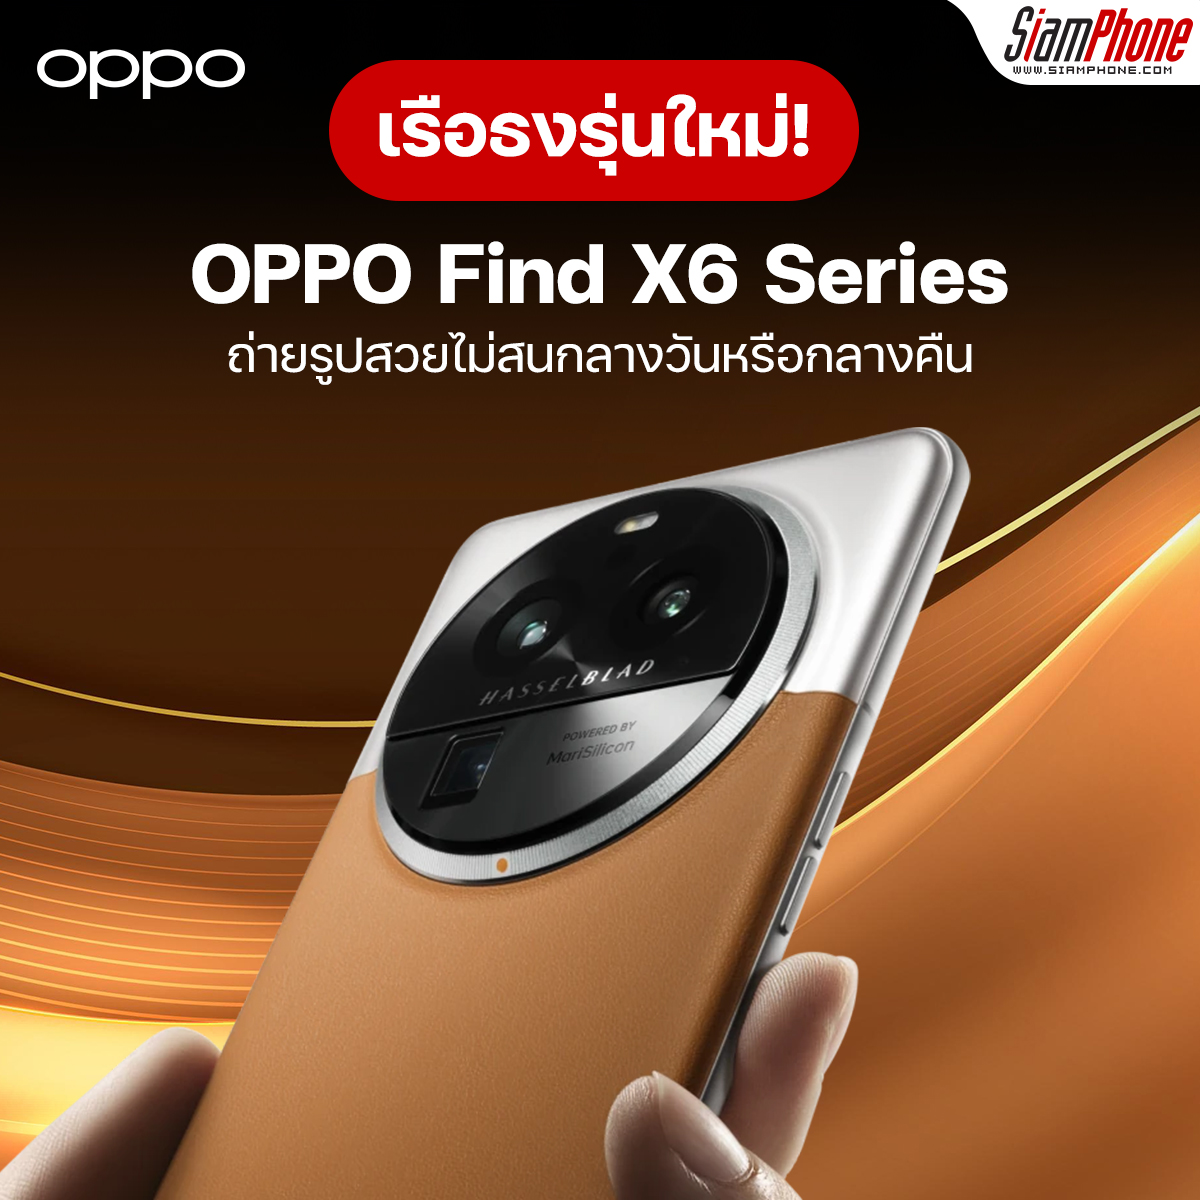 OPPO Find X6 Series, the new flagship  Take beautiful photos regardless of day or night.